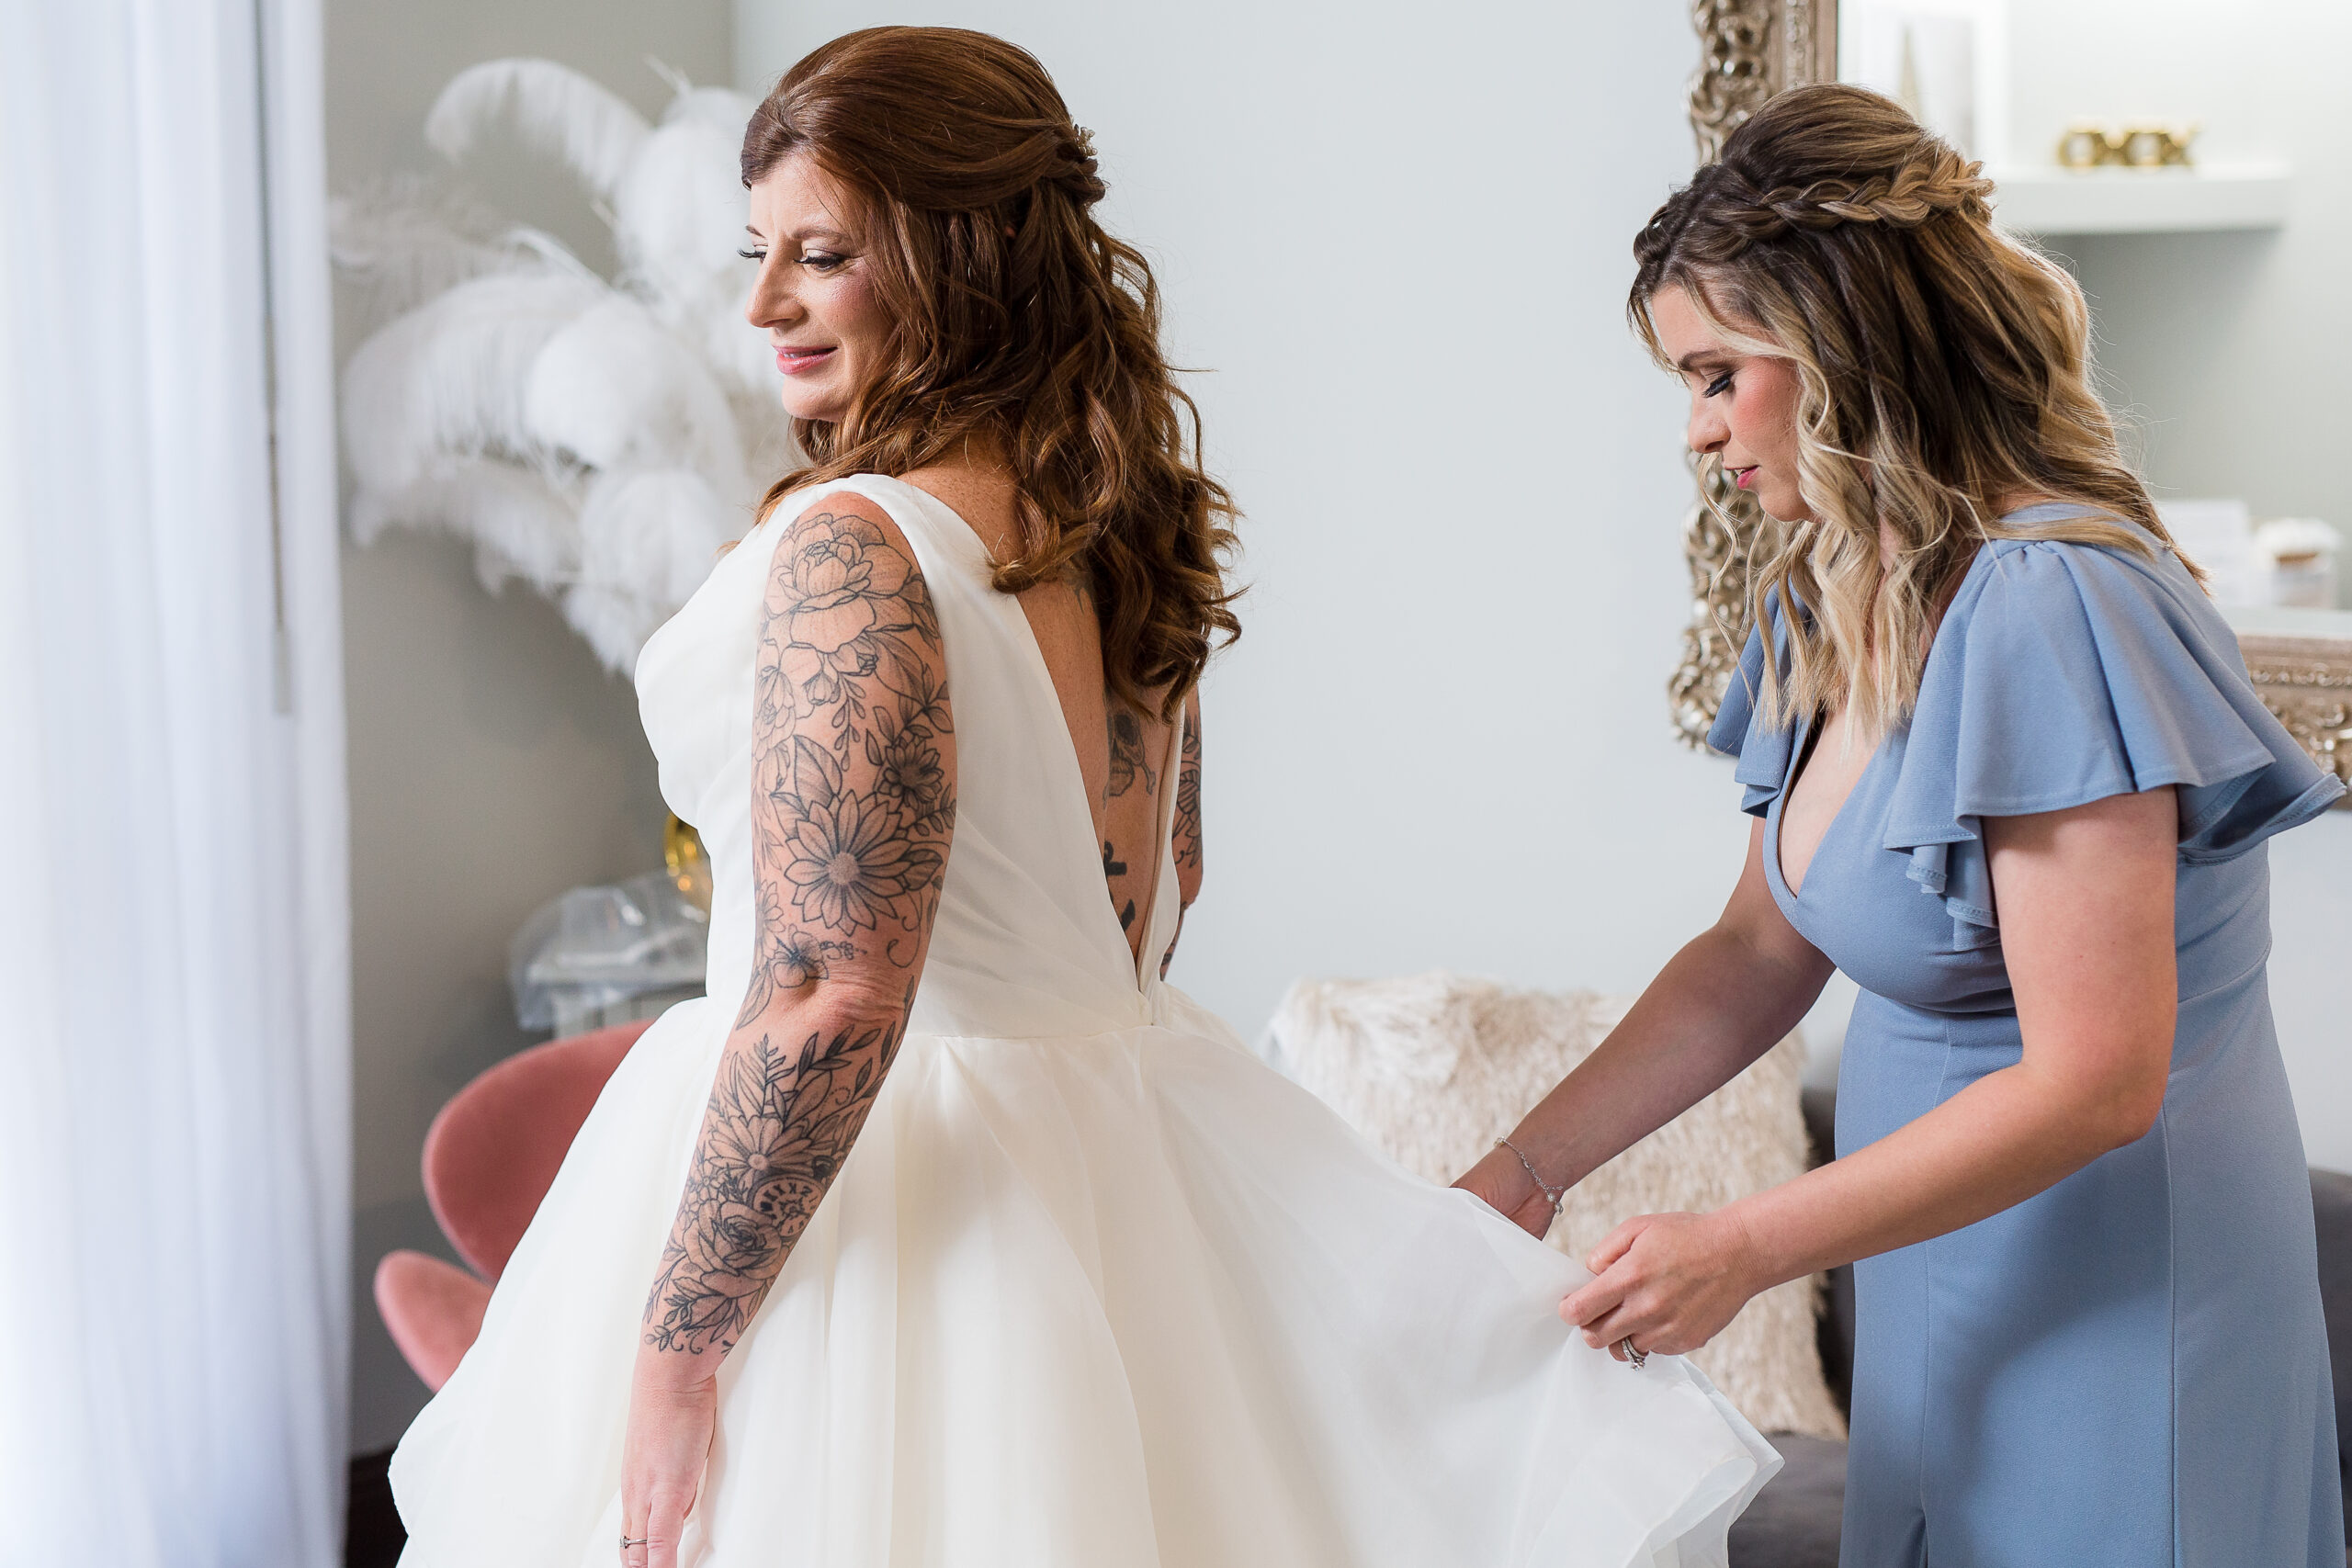 The morning of the wedding bride gets into her wedding dress as her maid of honor who is in a dusty blue bridesmaid stress helps her get ready